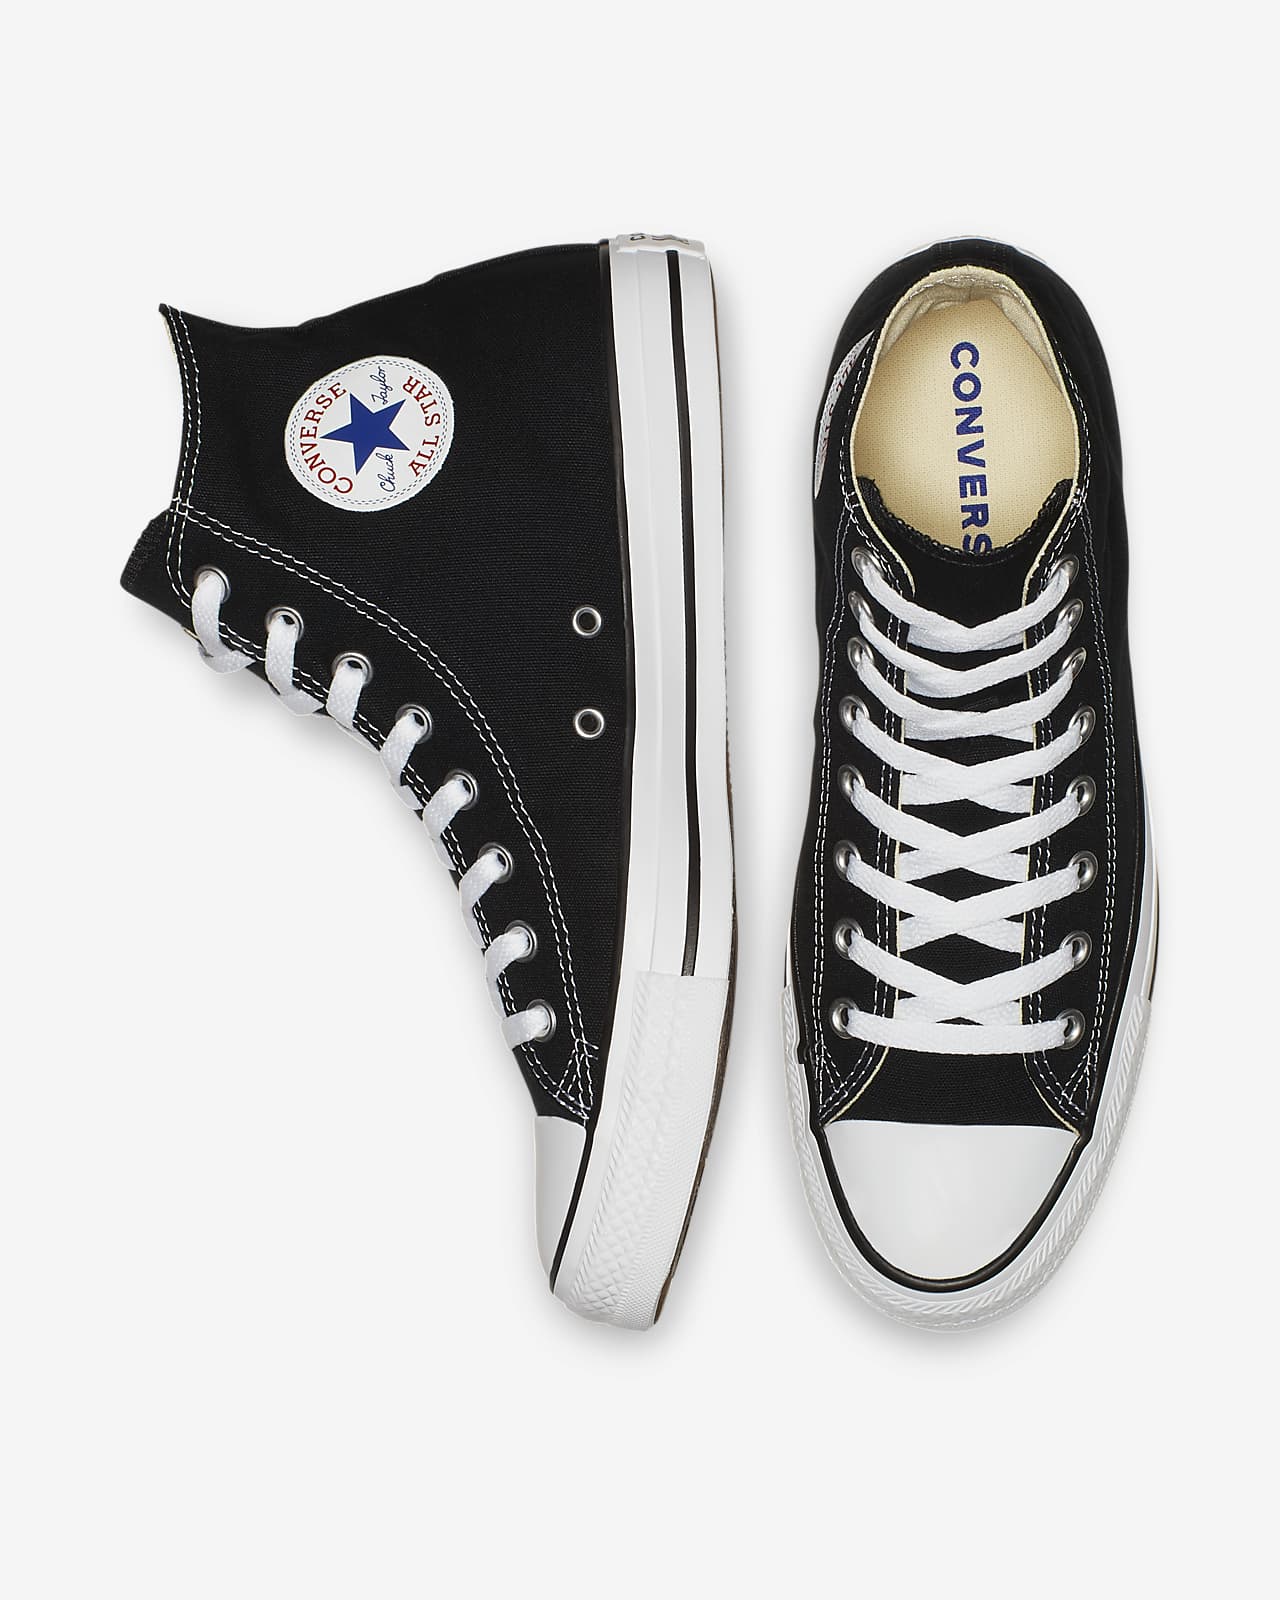 unisex converse chuck taylor all star 70 high top casual shoes